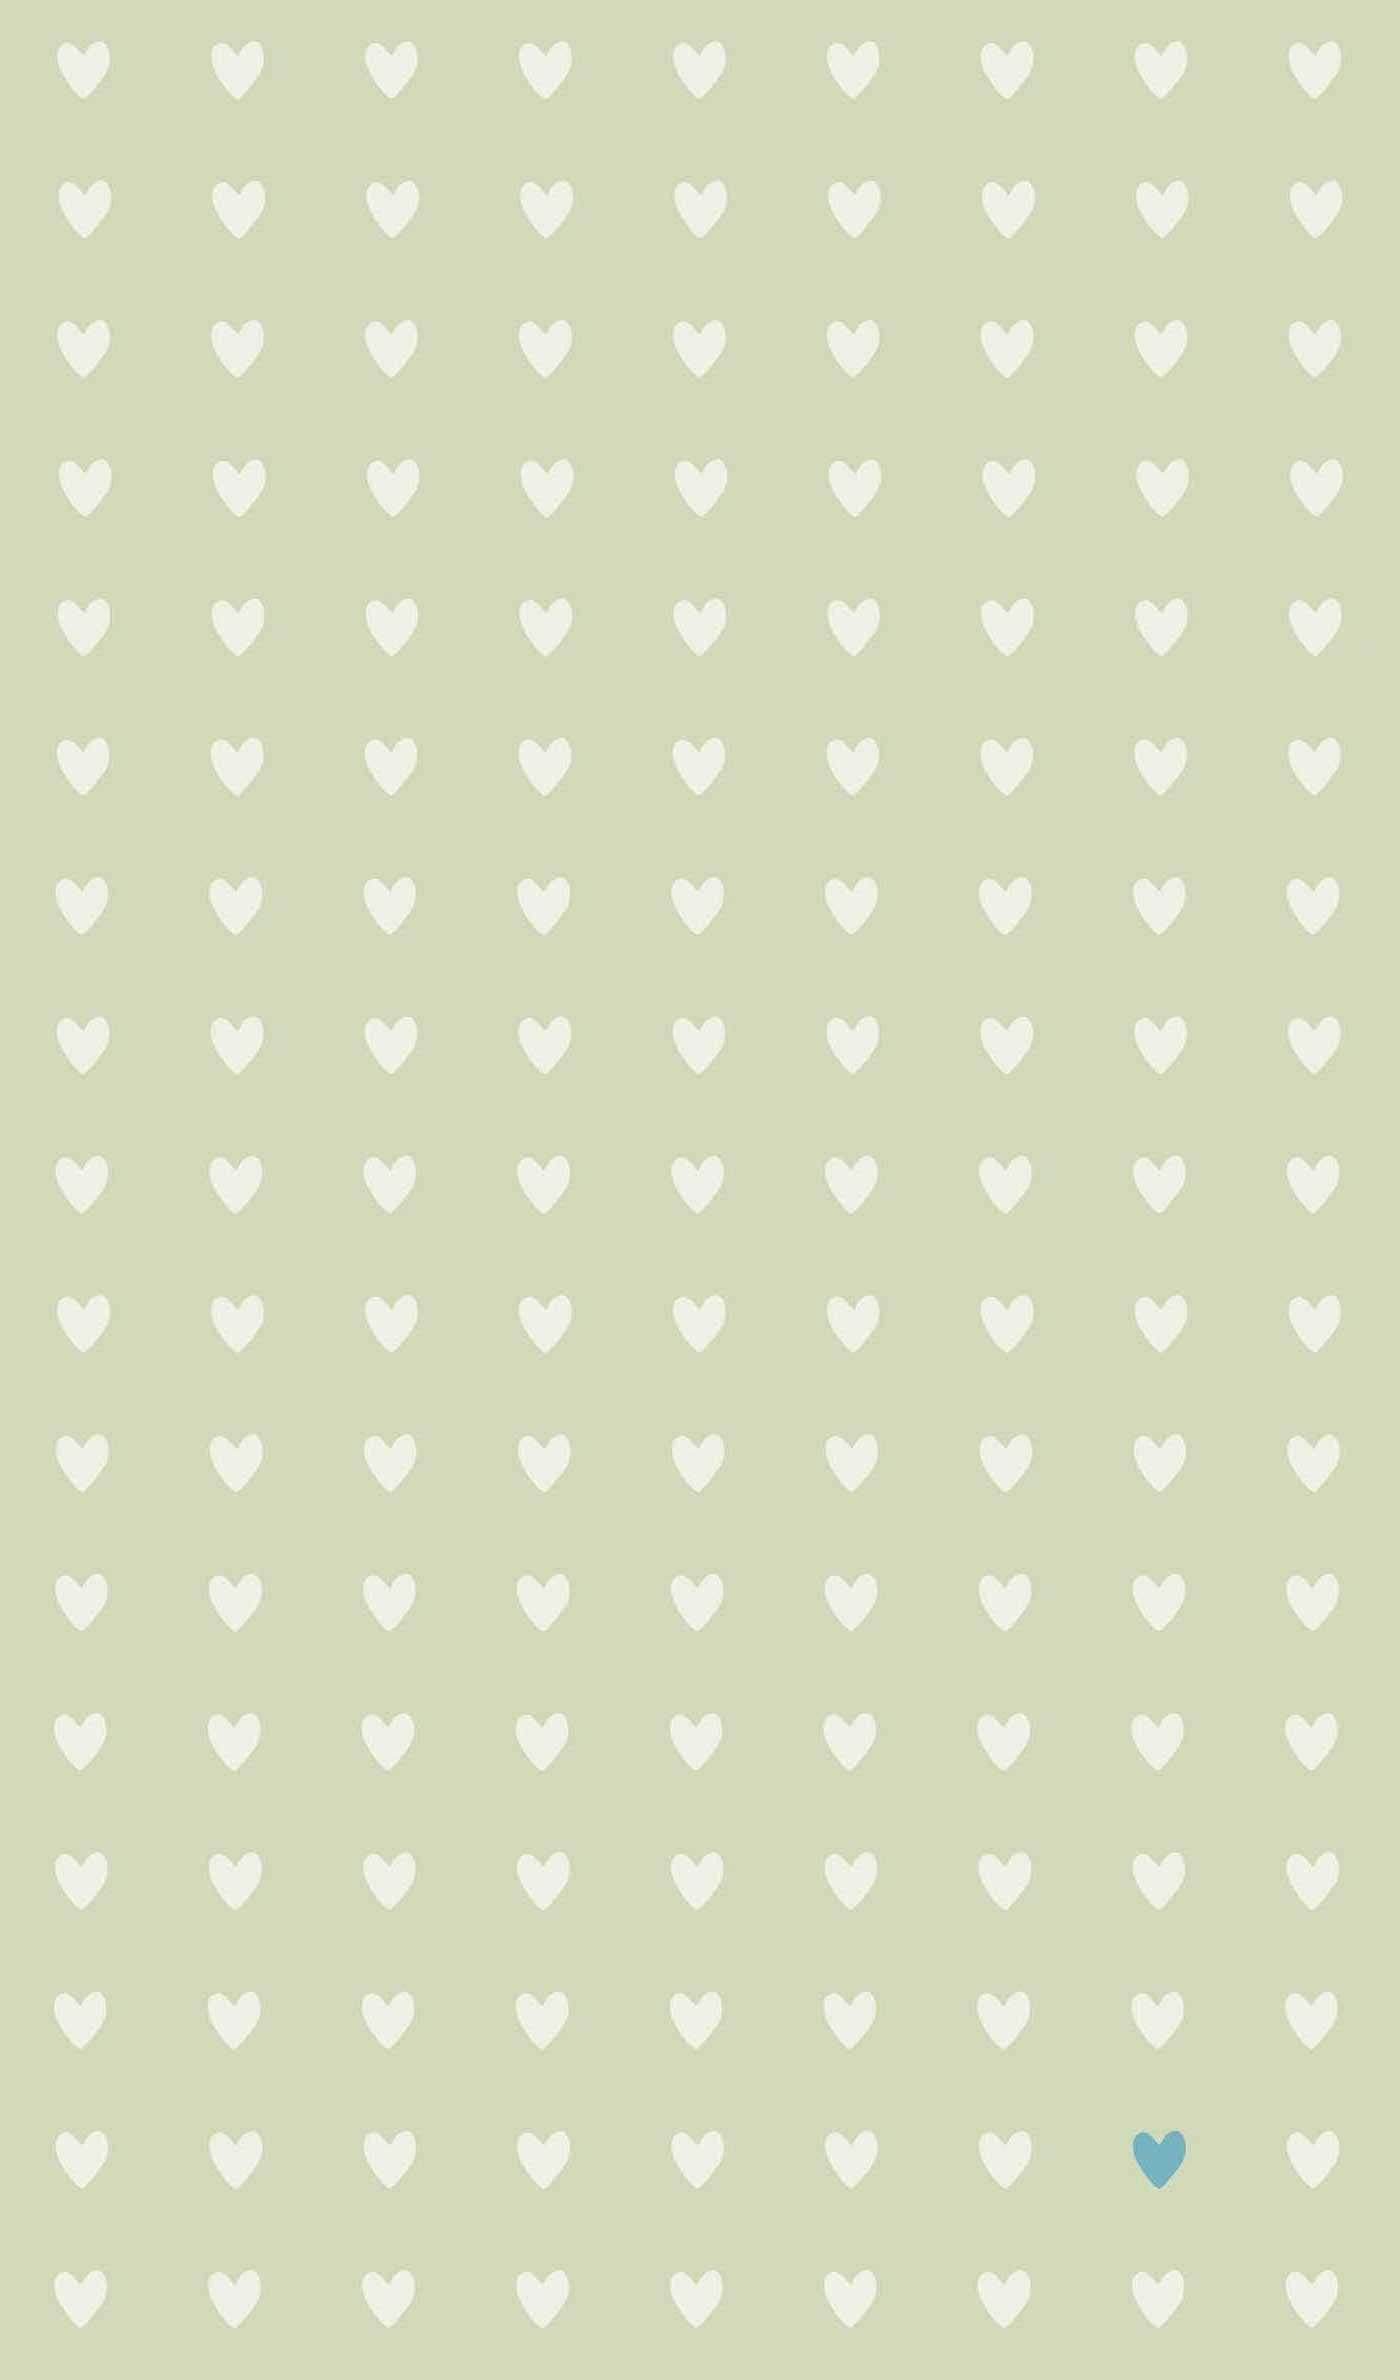 A Green Background With White Hearts